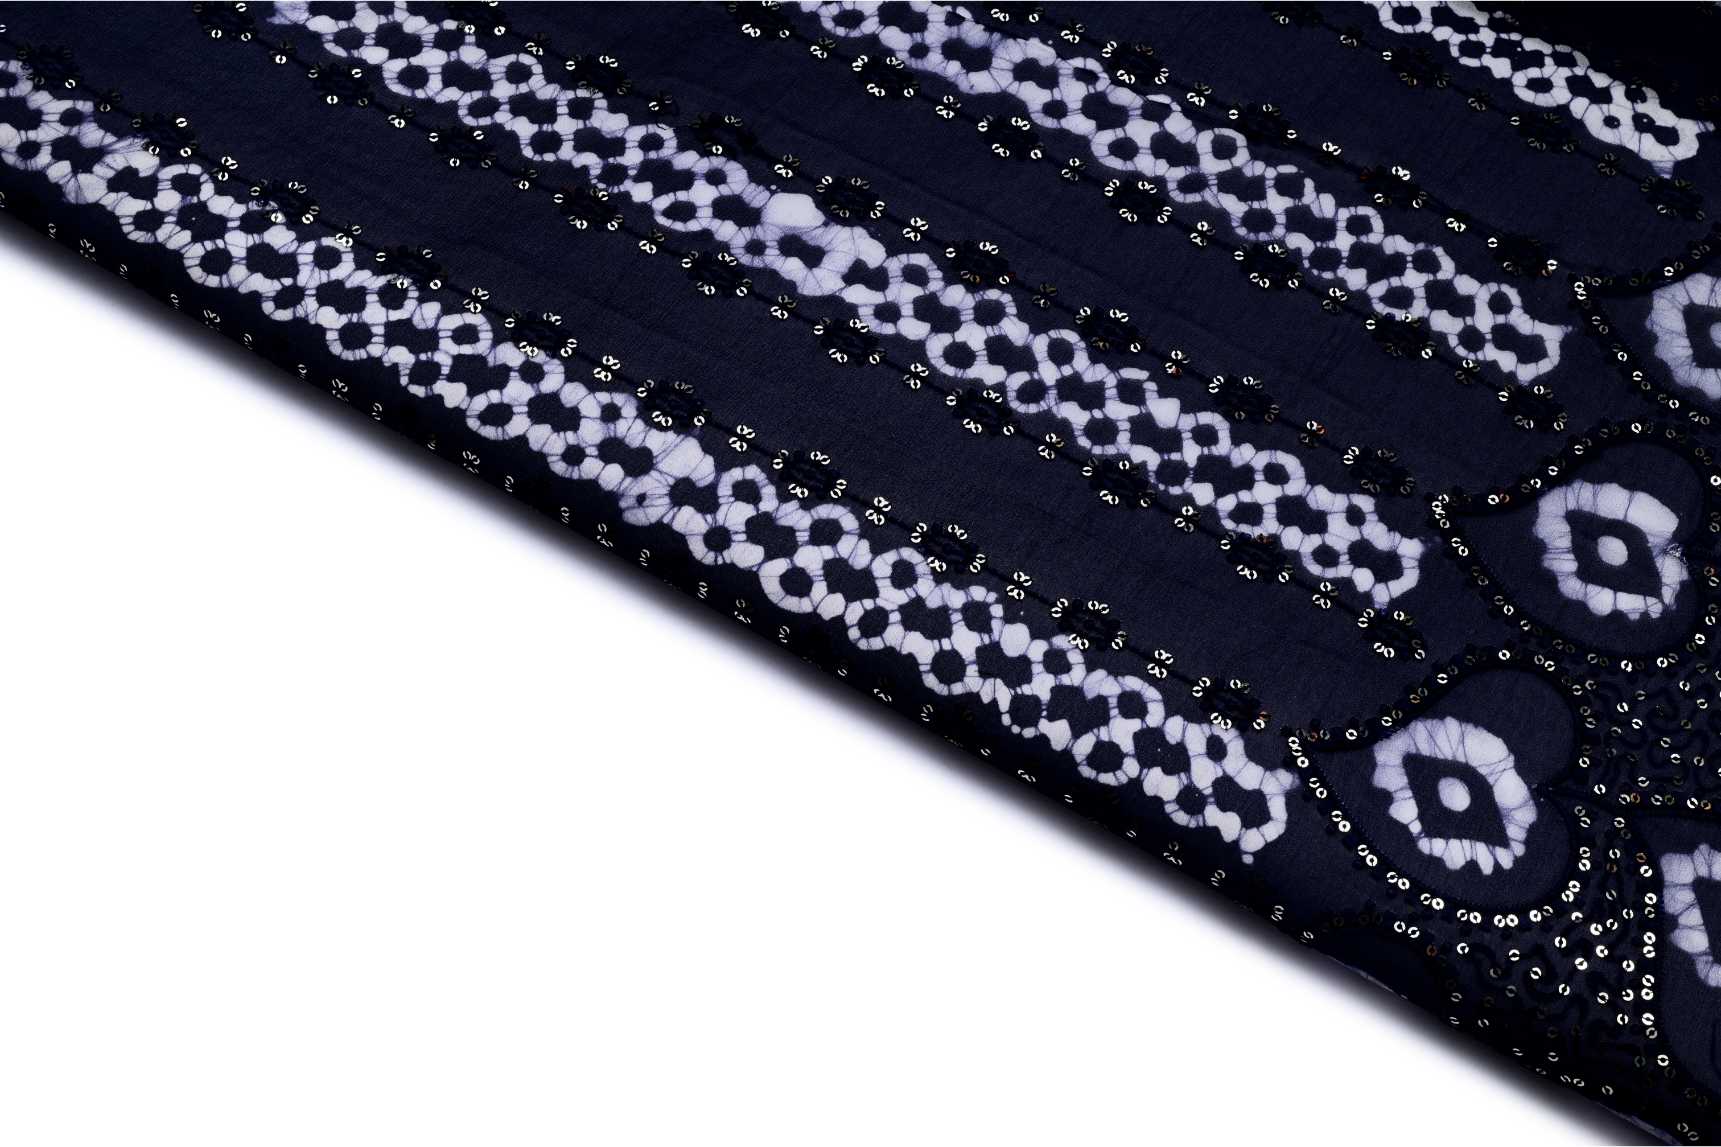 MIDNIGHT BLUE COLOR WISCOSS GEORGET BATIQ AND METALIC SEQUANCE GEORMETRIC  BELT  WITH HEAVY METALIC SEQUANCE BORDER PATTERN EMBROIDERED WORK FABRIC 11305